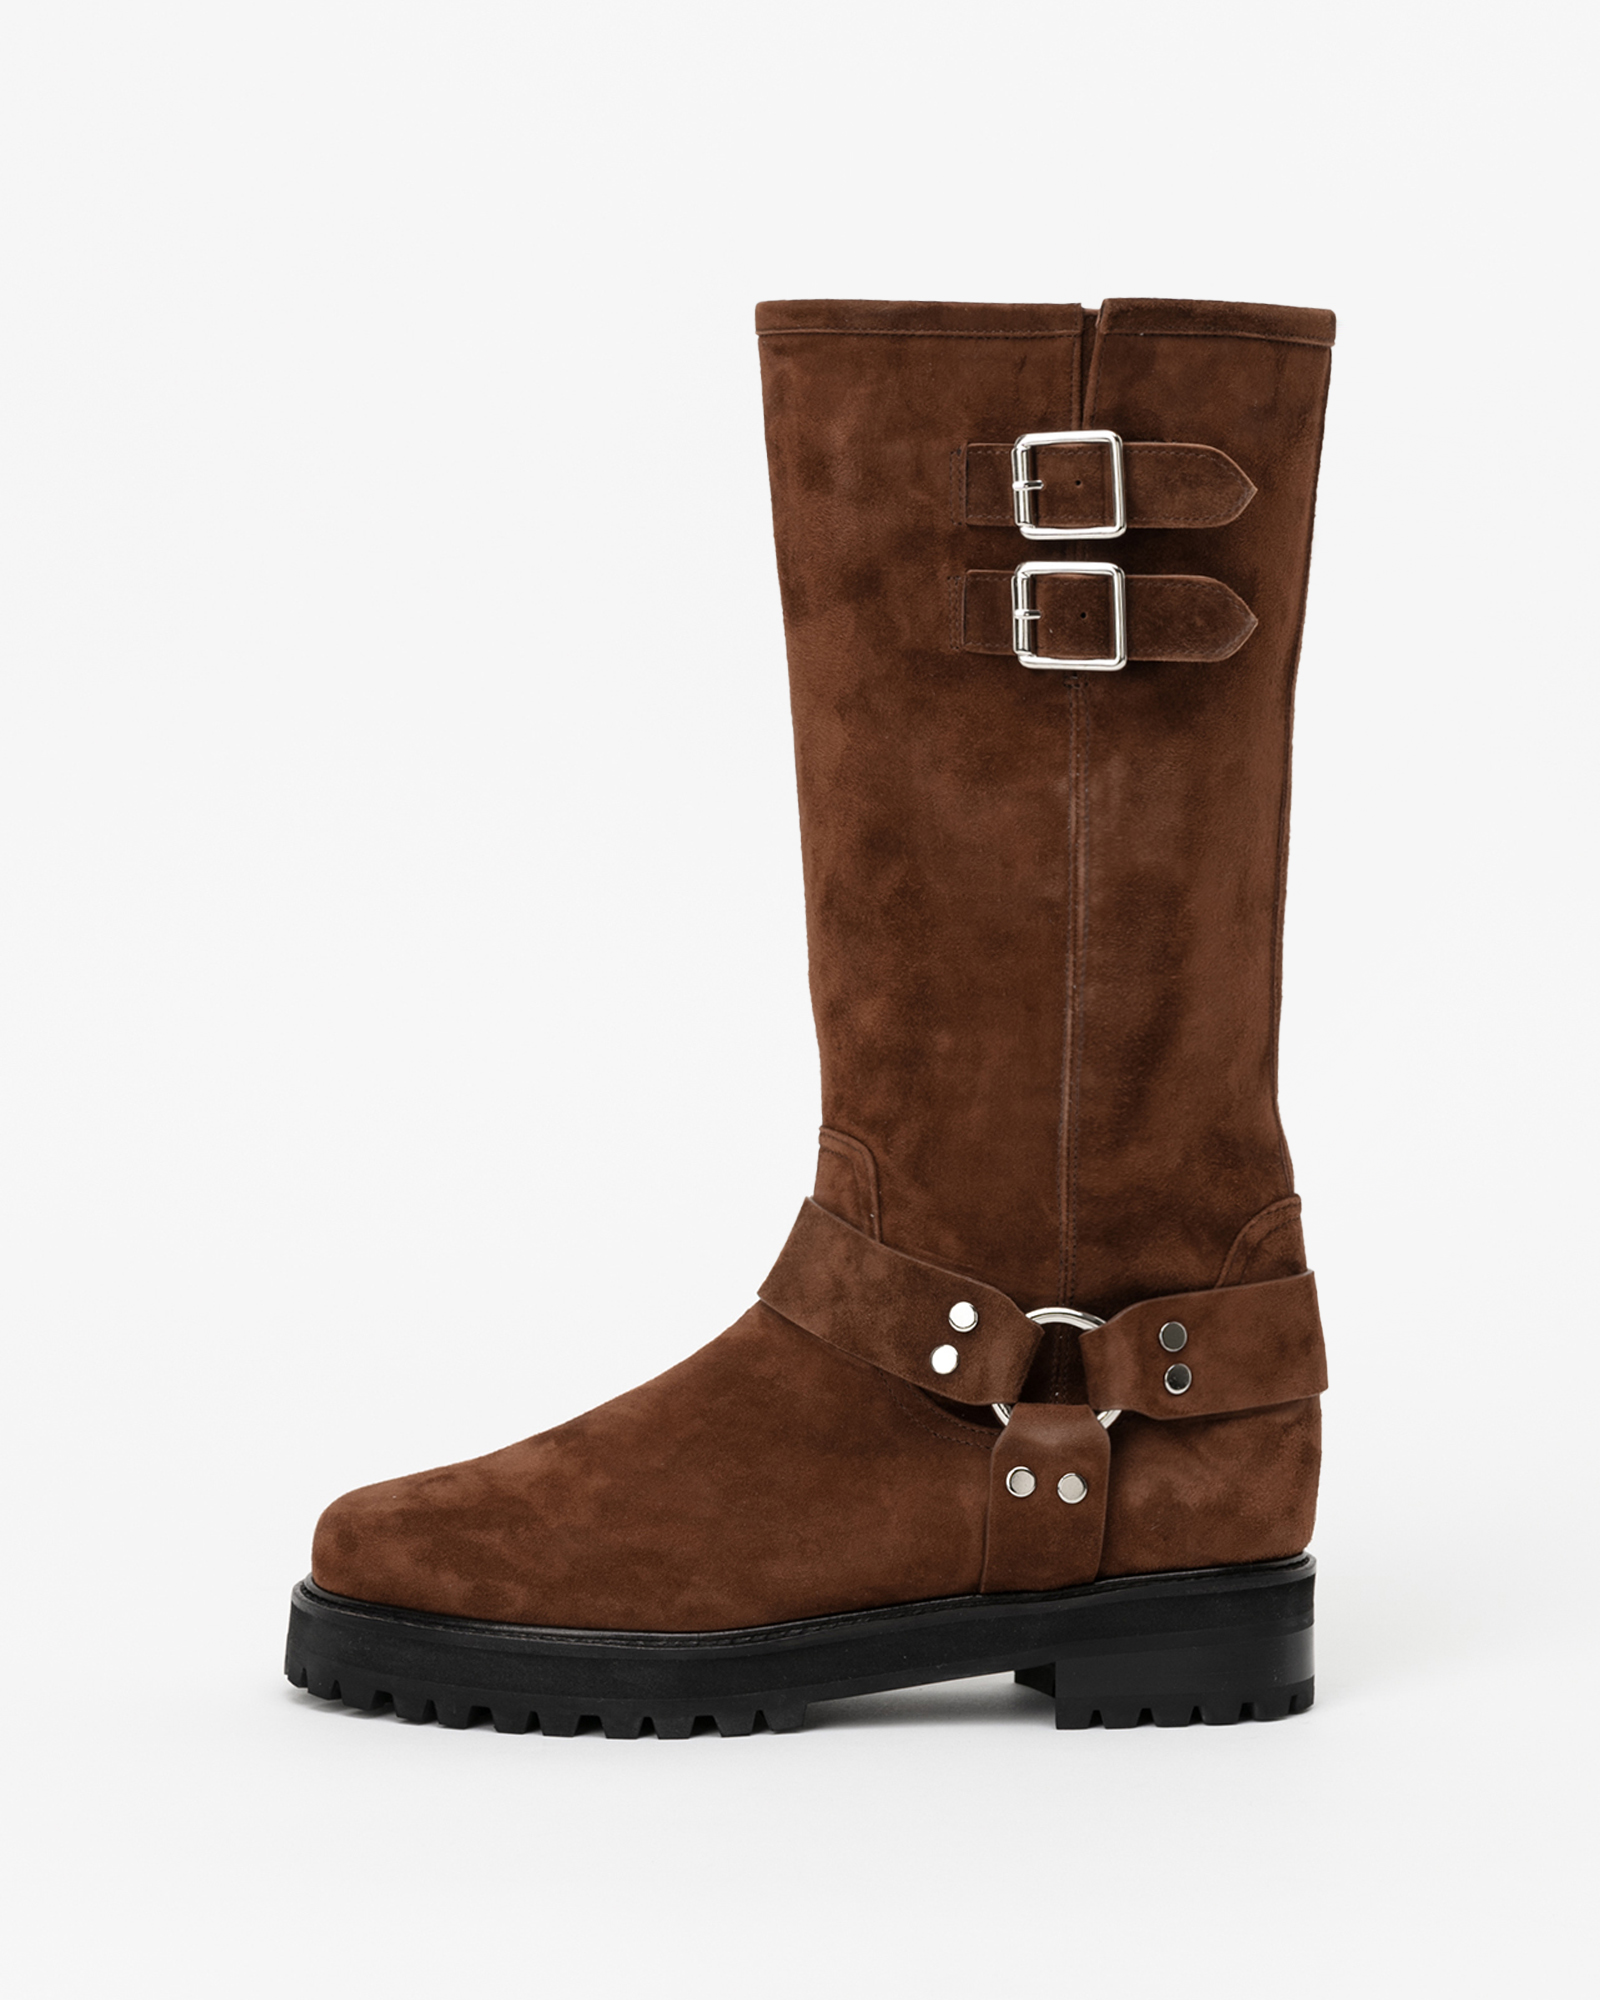 Brooklyn Belted Riding Boots